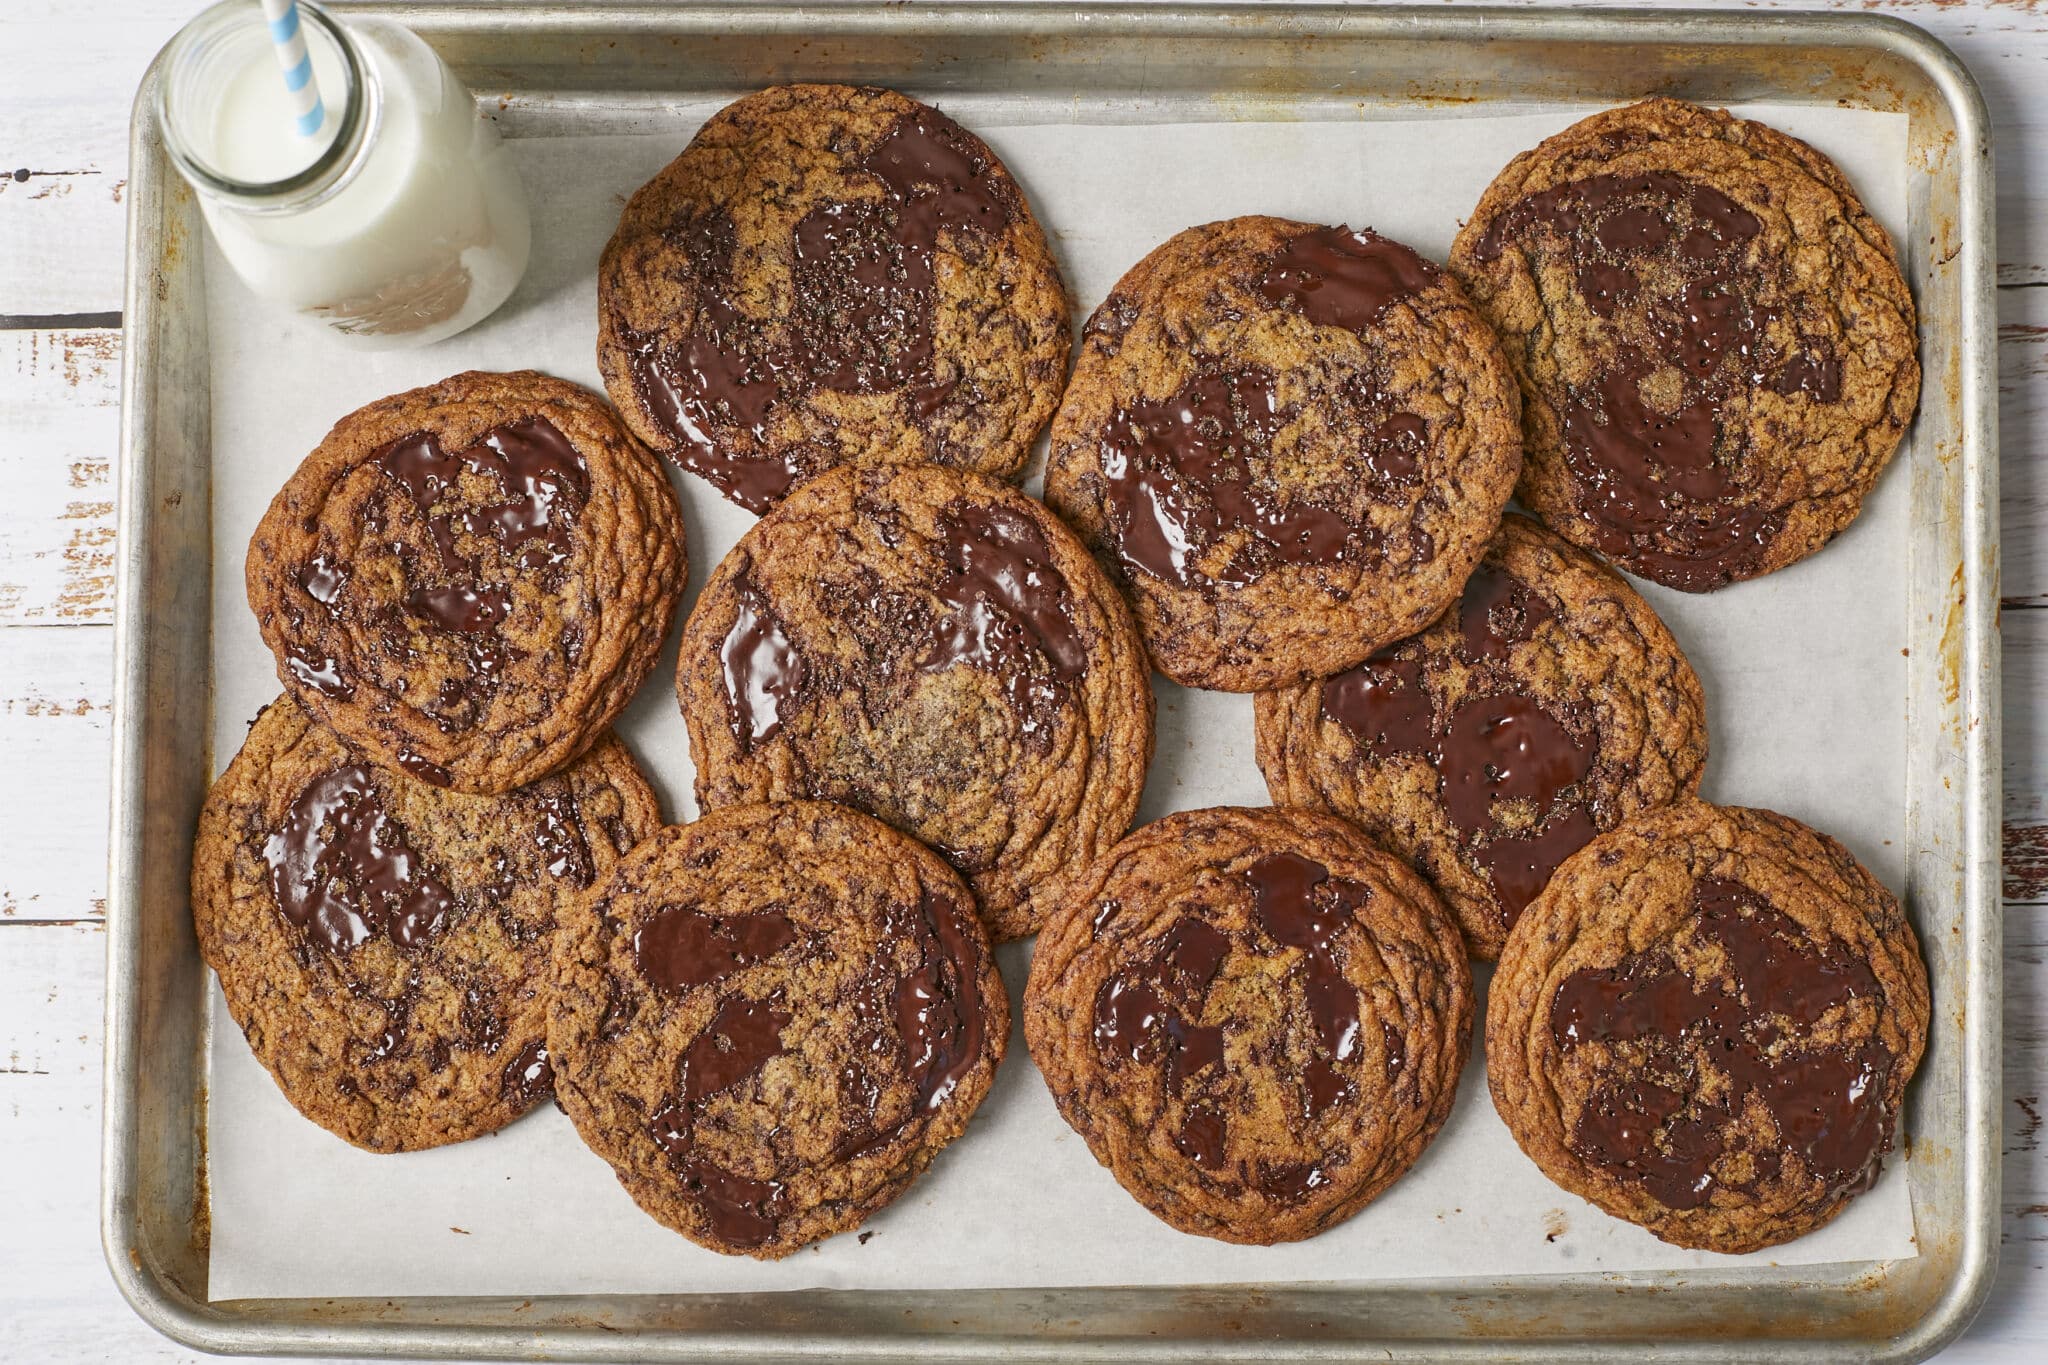 Best Ever Chocolate Chip Cookies on a baking tray, covered with crinkles on the surface and loaded with pools of melted chocolate in the center, to go perfectly with a glass of milk in the up left corner of the tray.